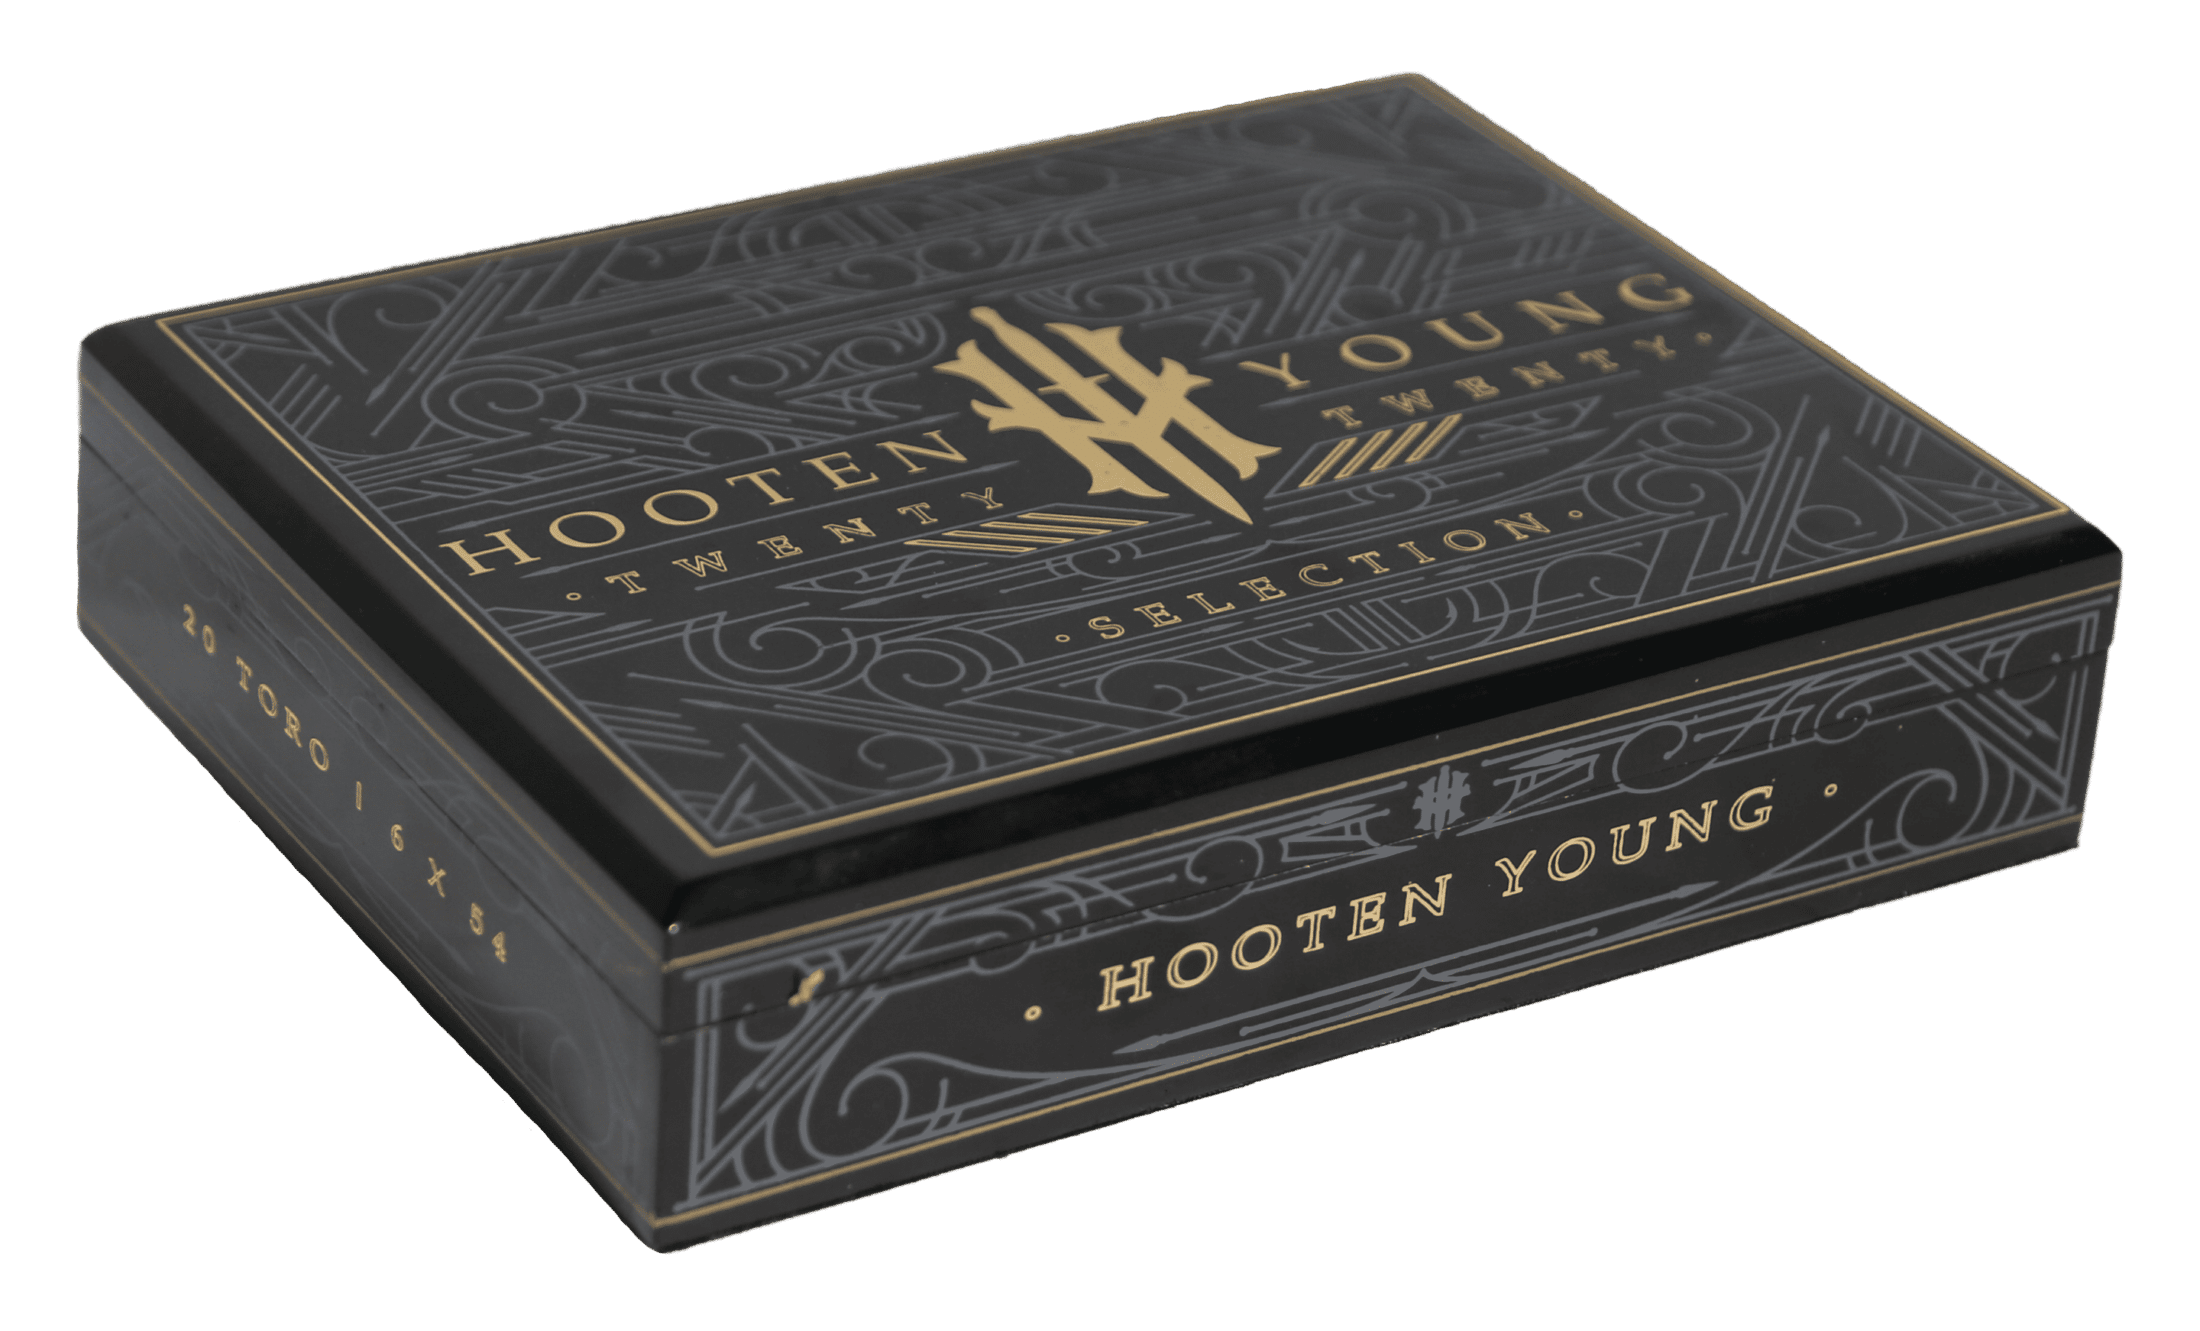 Closed box of 20 count Hooten Young Toro cigars